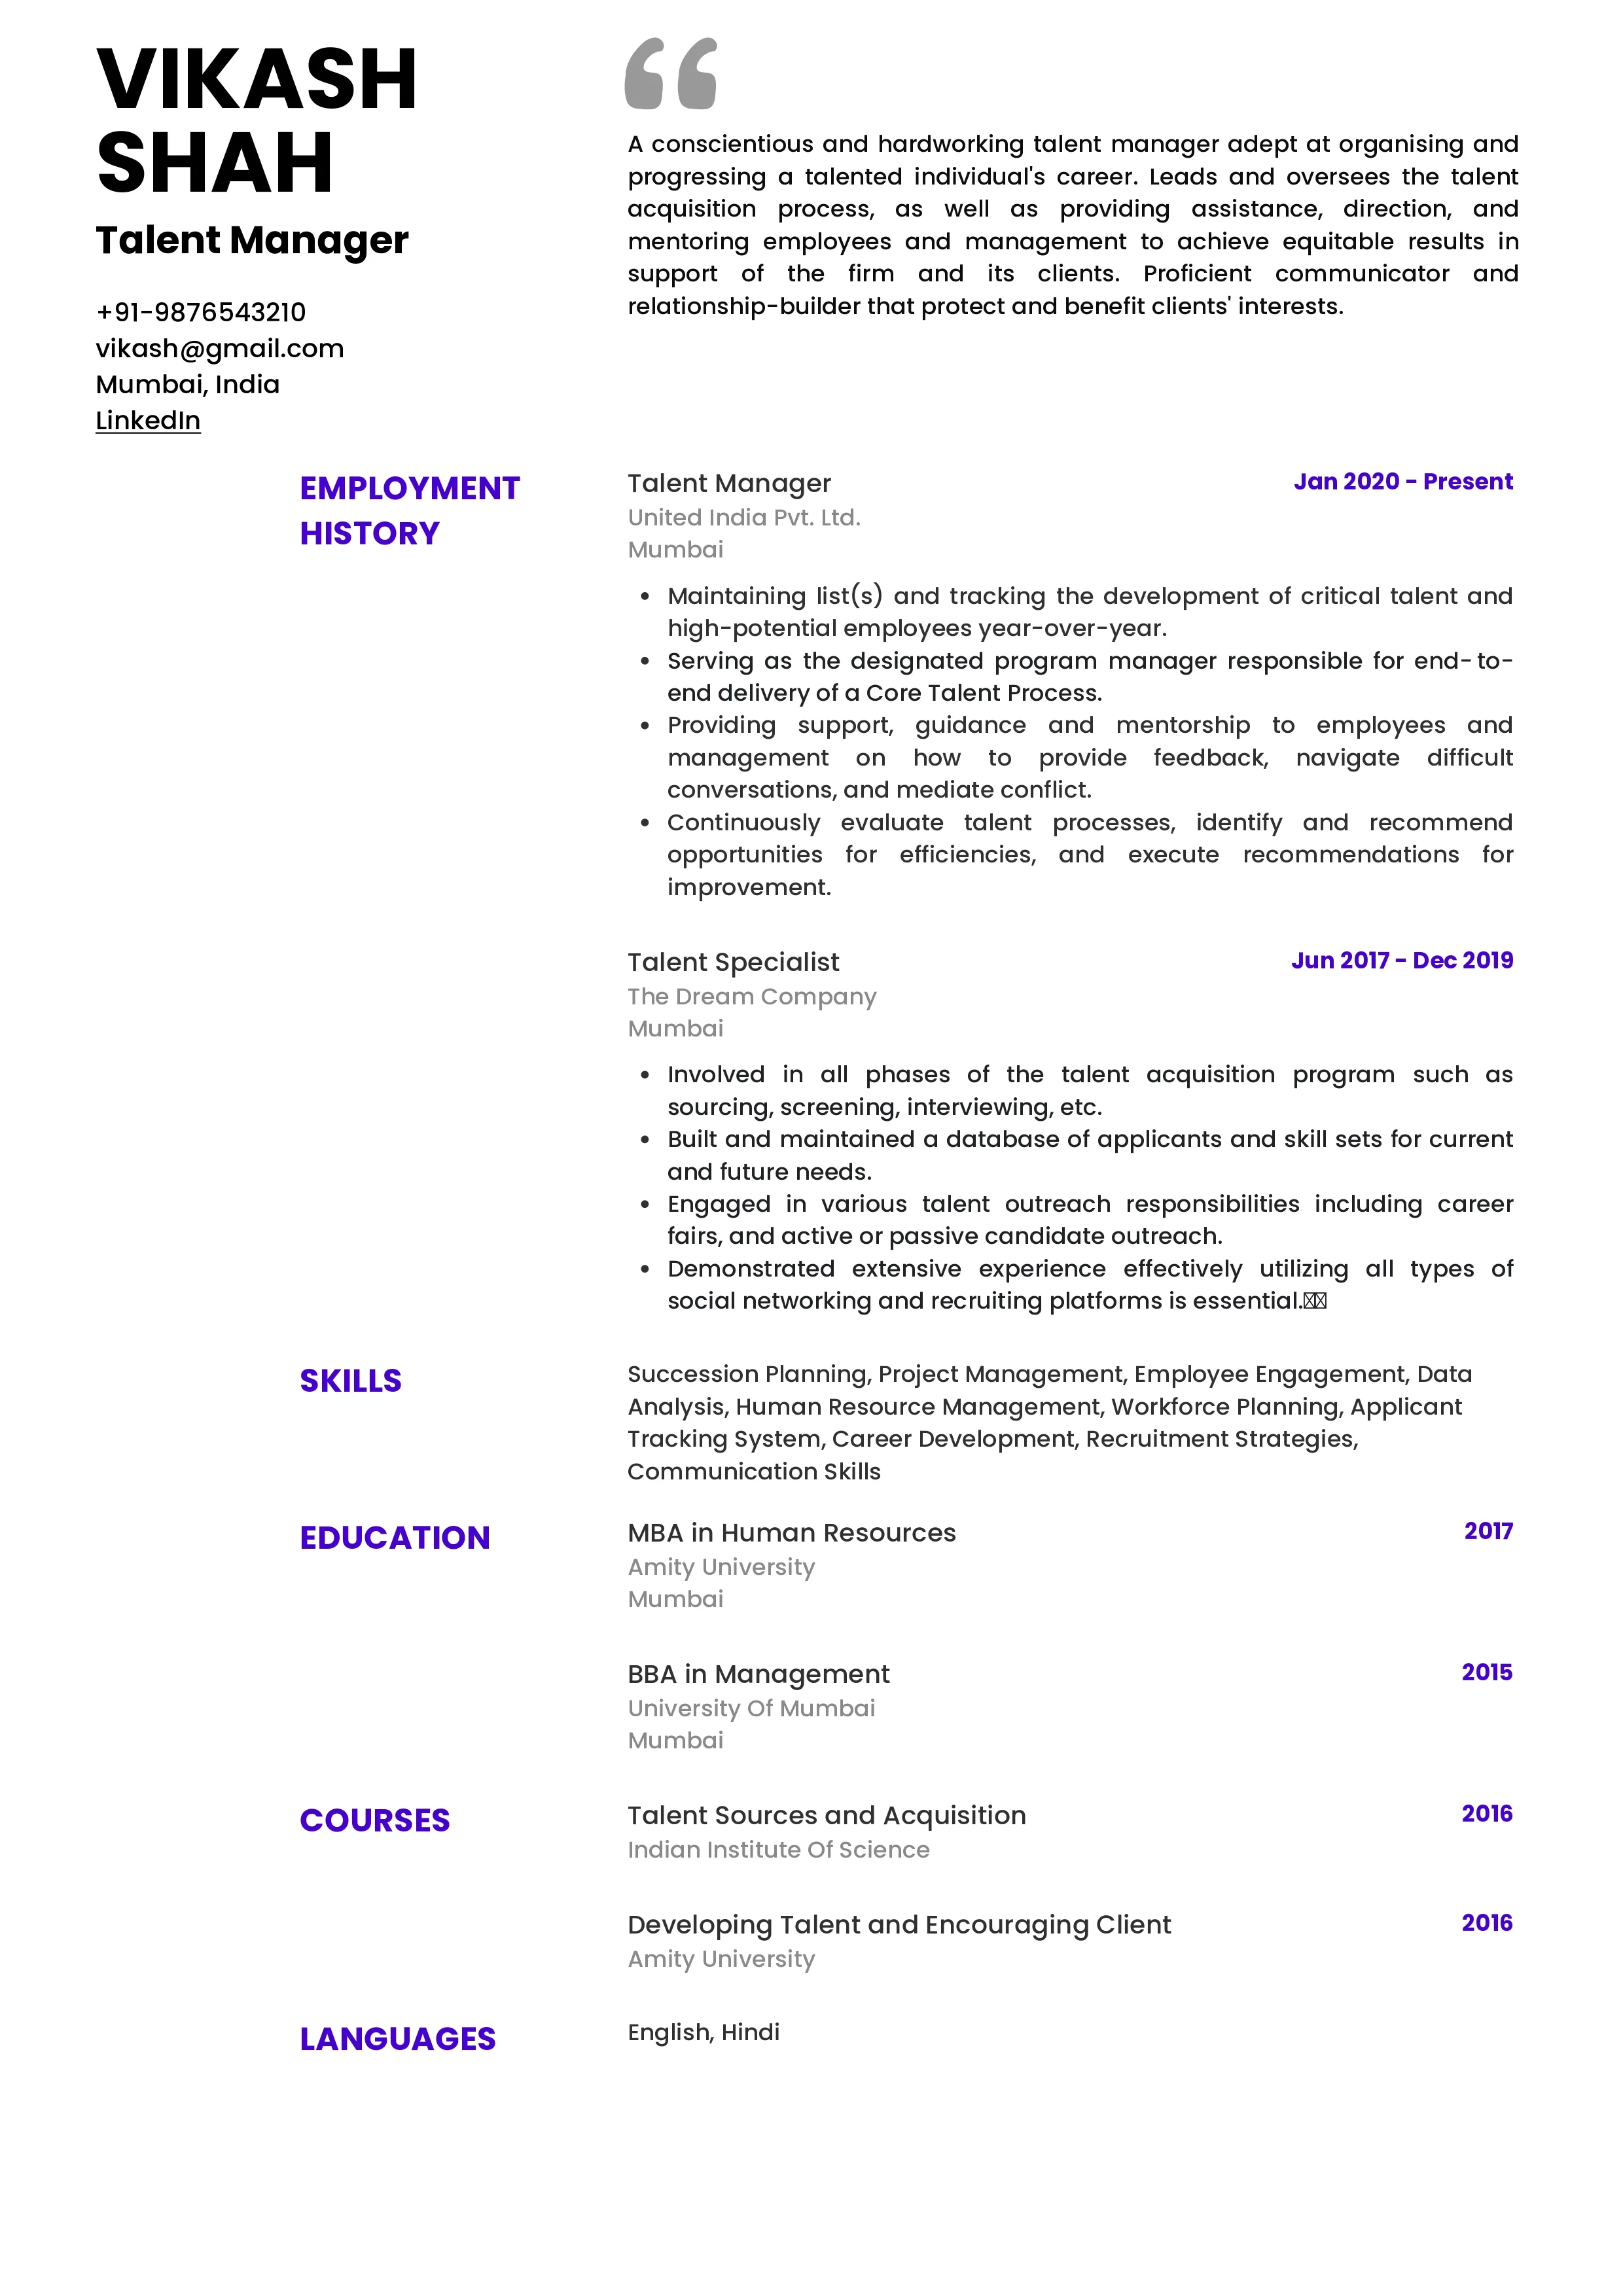 Sample Resume of Talent Manager | Free Resume Templates & Samples on Resumod.co